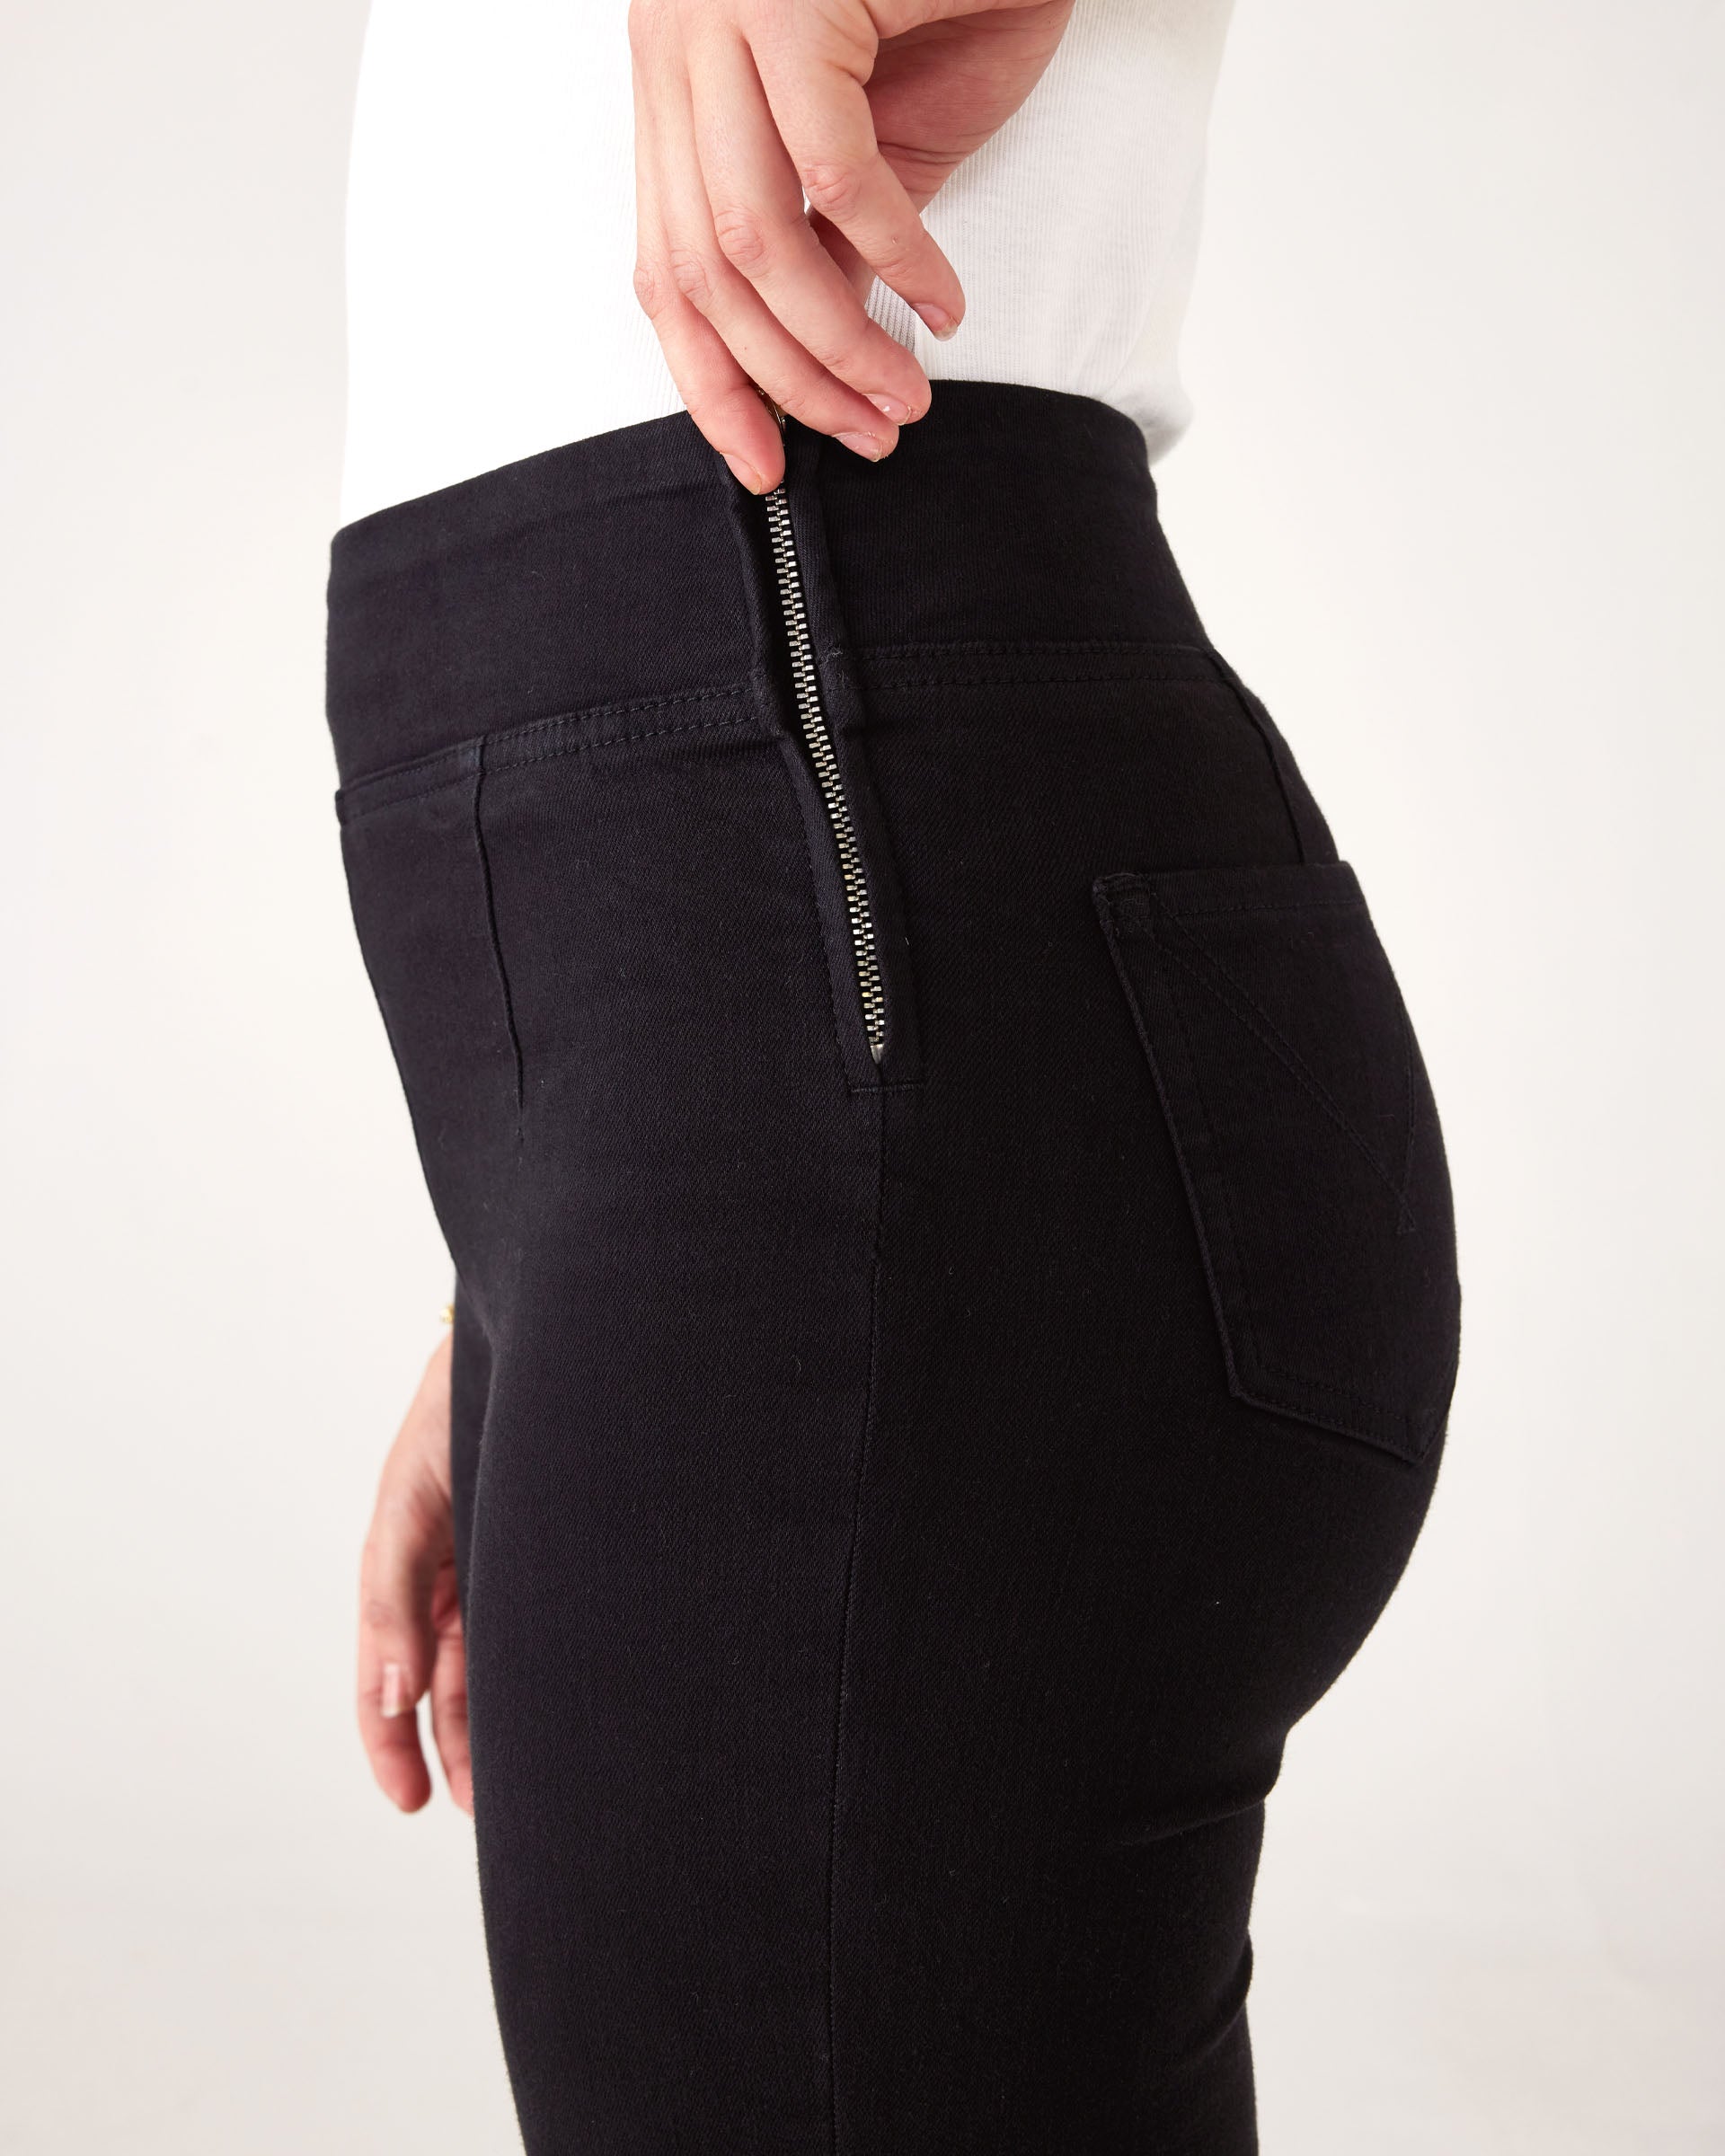 Close-up of side zipper: Woman wearing Mersea Nomad black ankle cigarette jeans, standing against a white background